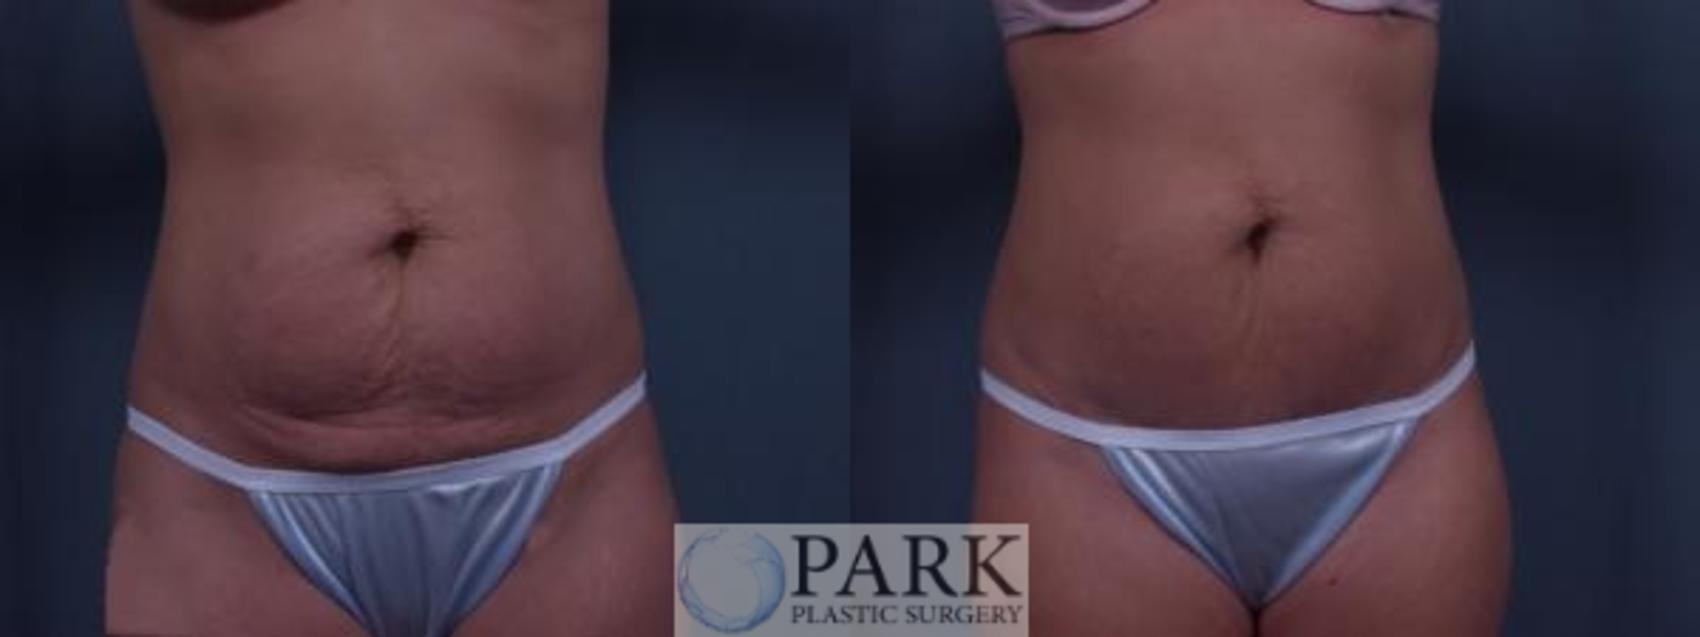 Tummy Tuck for Rocky Mount, Raleigh, NC – Park Plastic Surgery